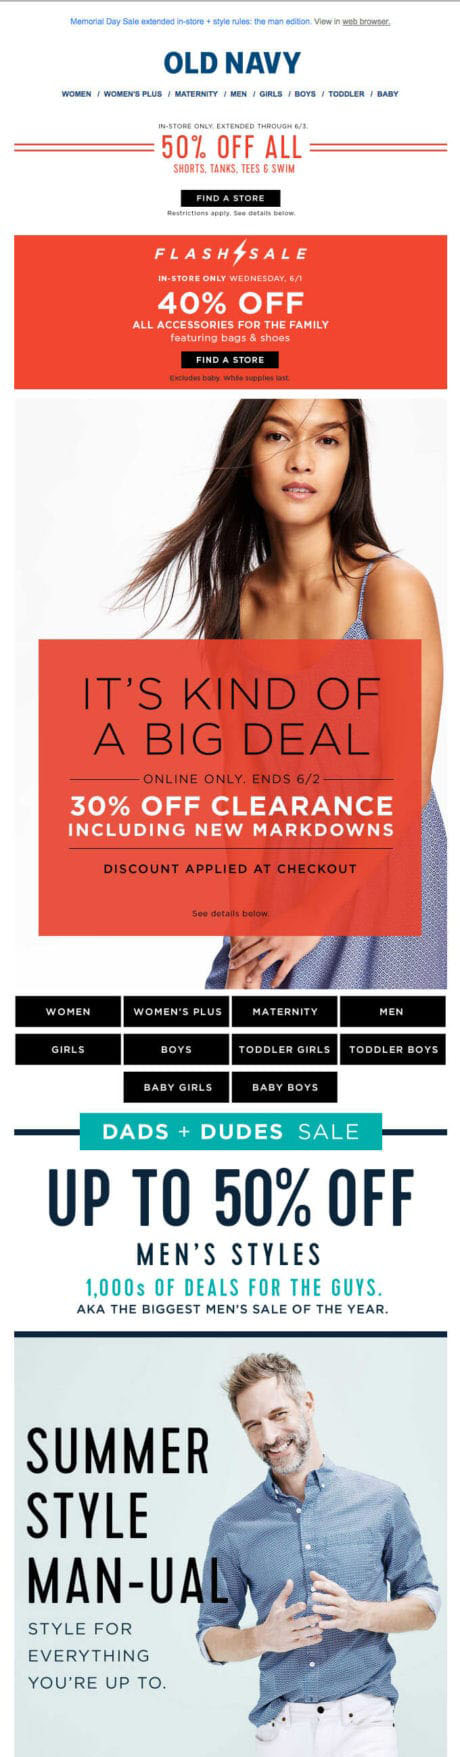 Promotional Emails - Special Offer Email - Old Navy